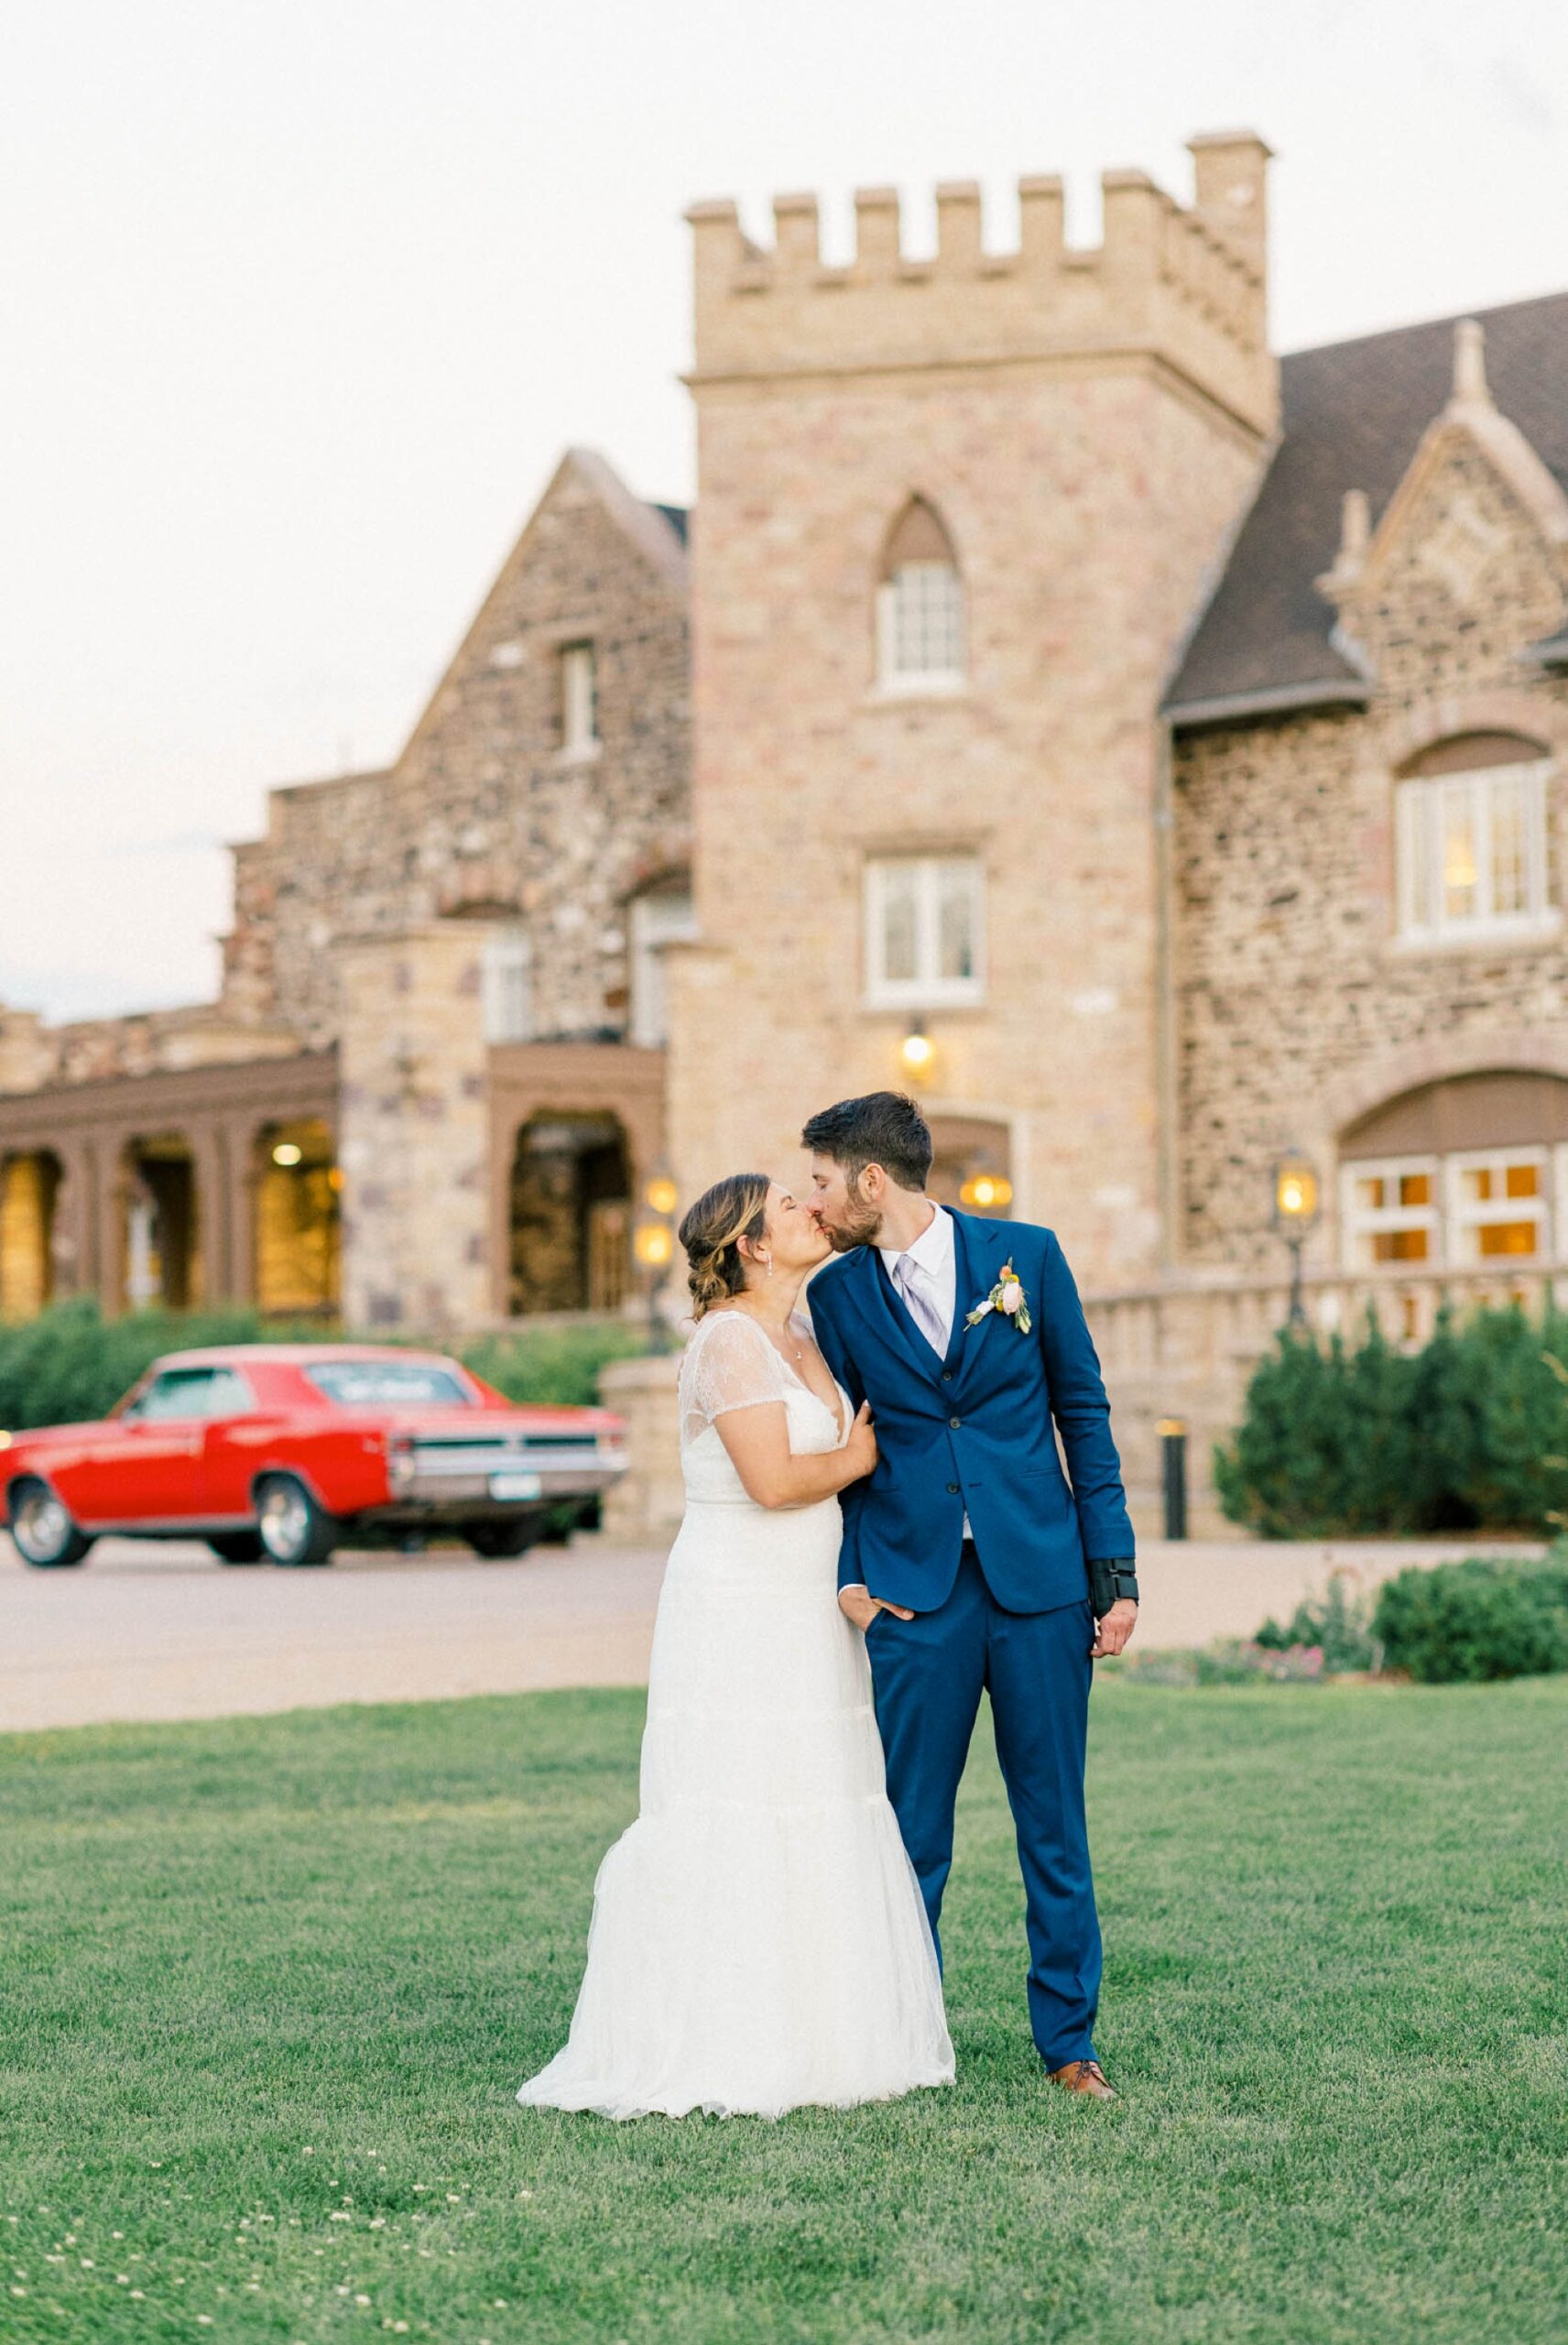 Elegant Summer wedding at the Highlands Ranch Mansion captured by Taylor Nicole Photography.